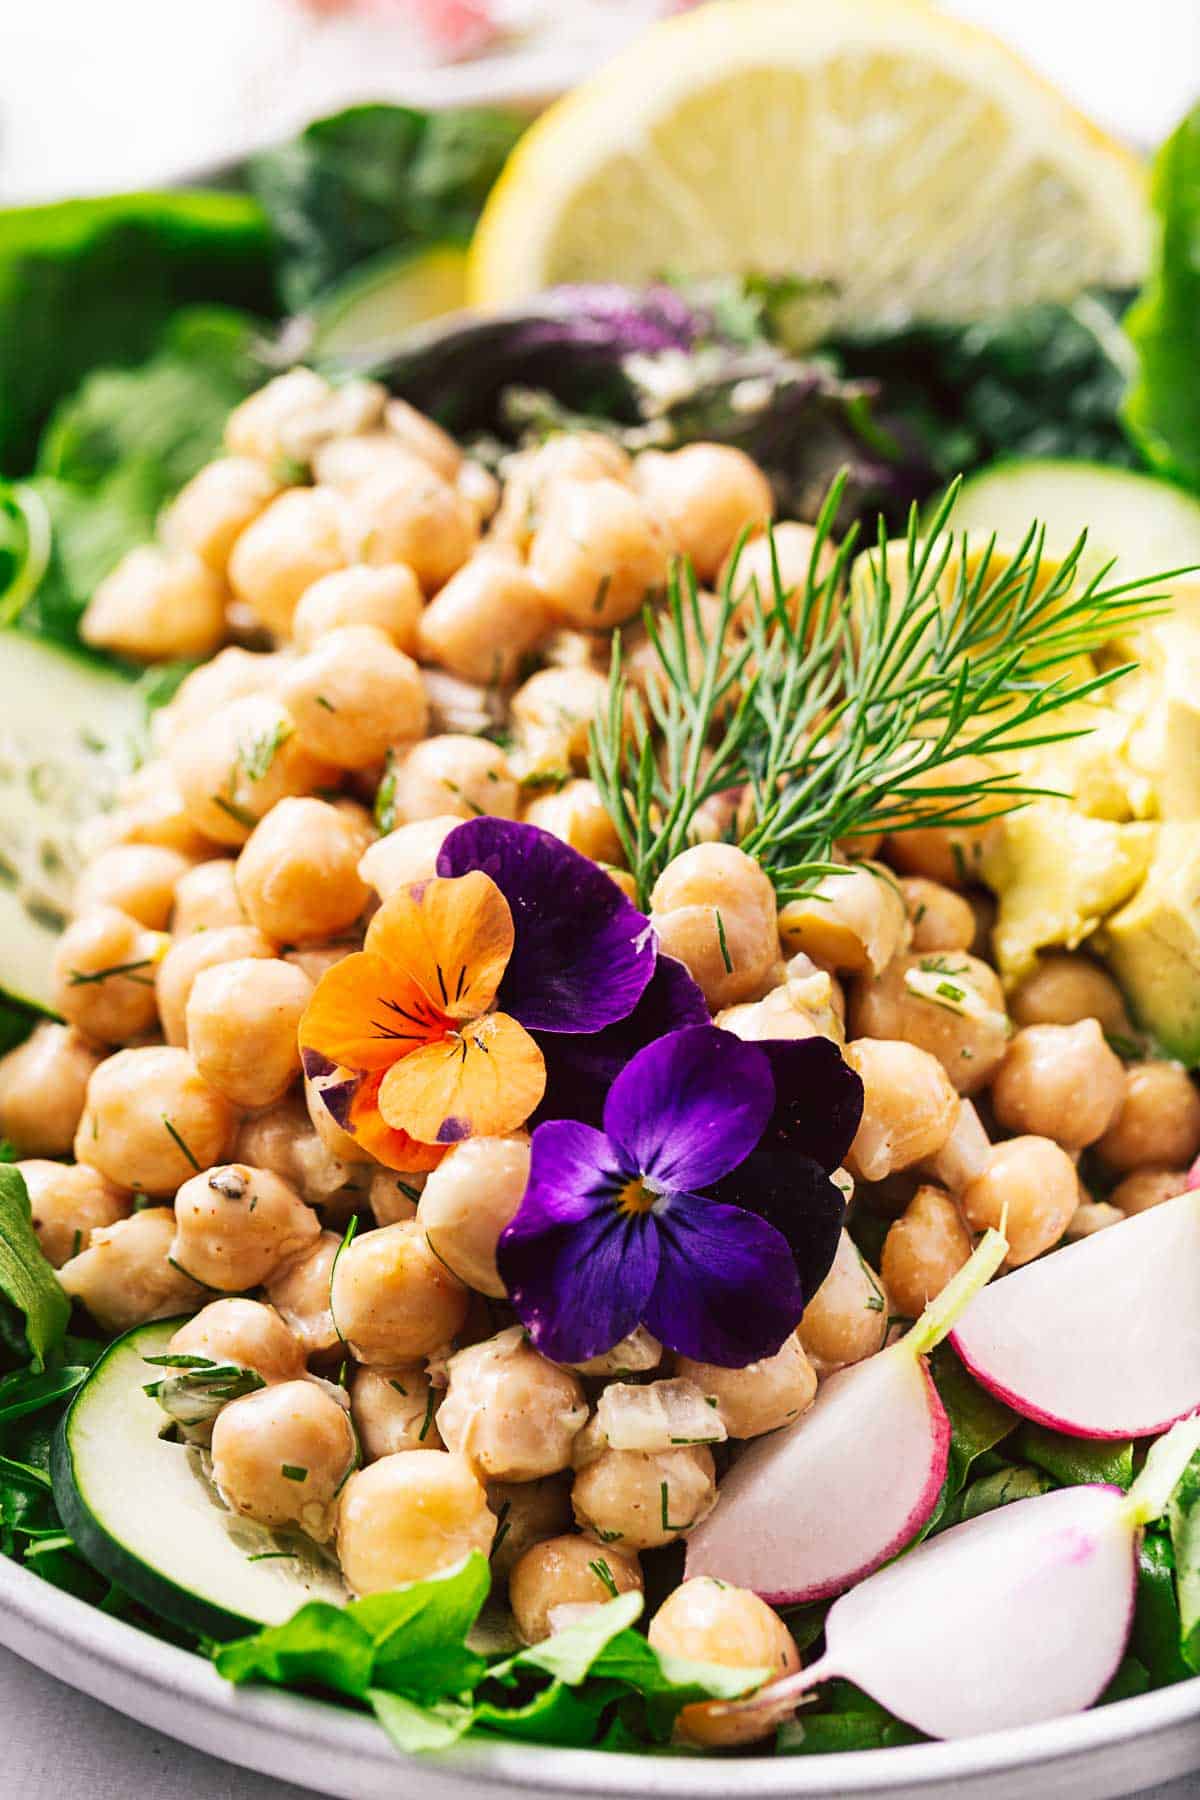 A closeup view of a vegan chickpea salad topped with purple flowers⠀⠀⠀⠀⠀⠀⠀⠀⠀